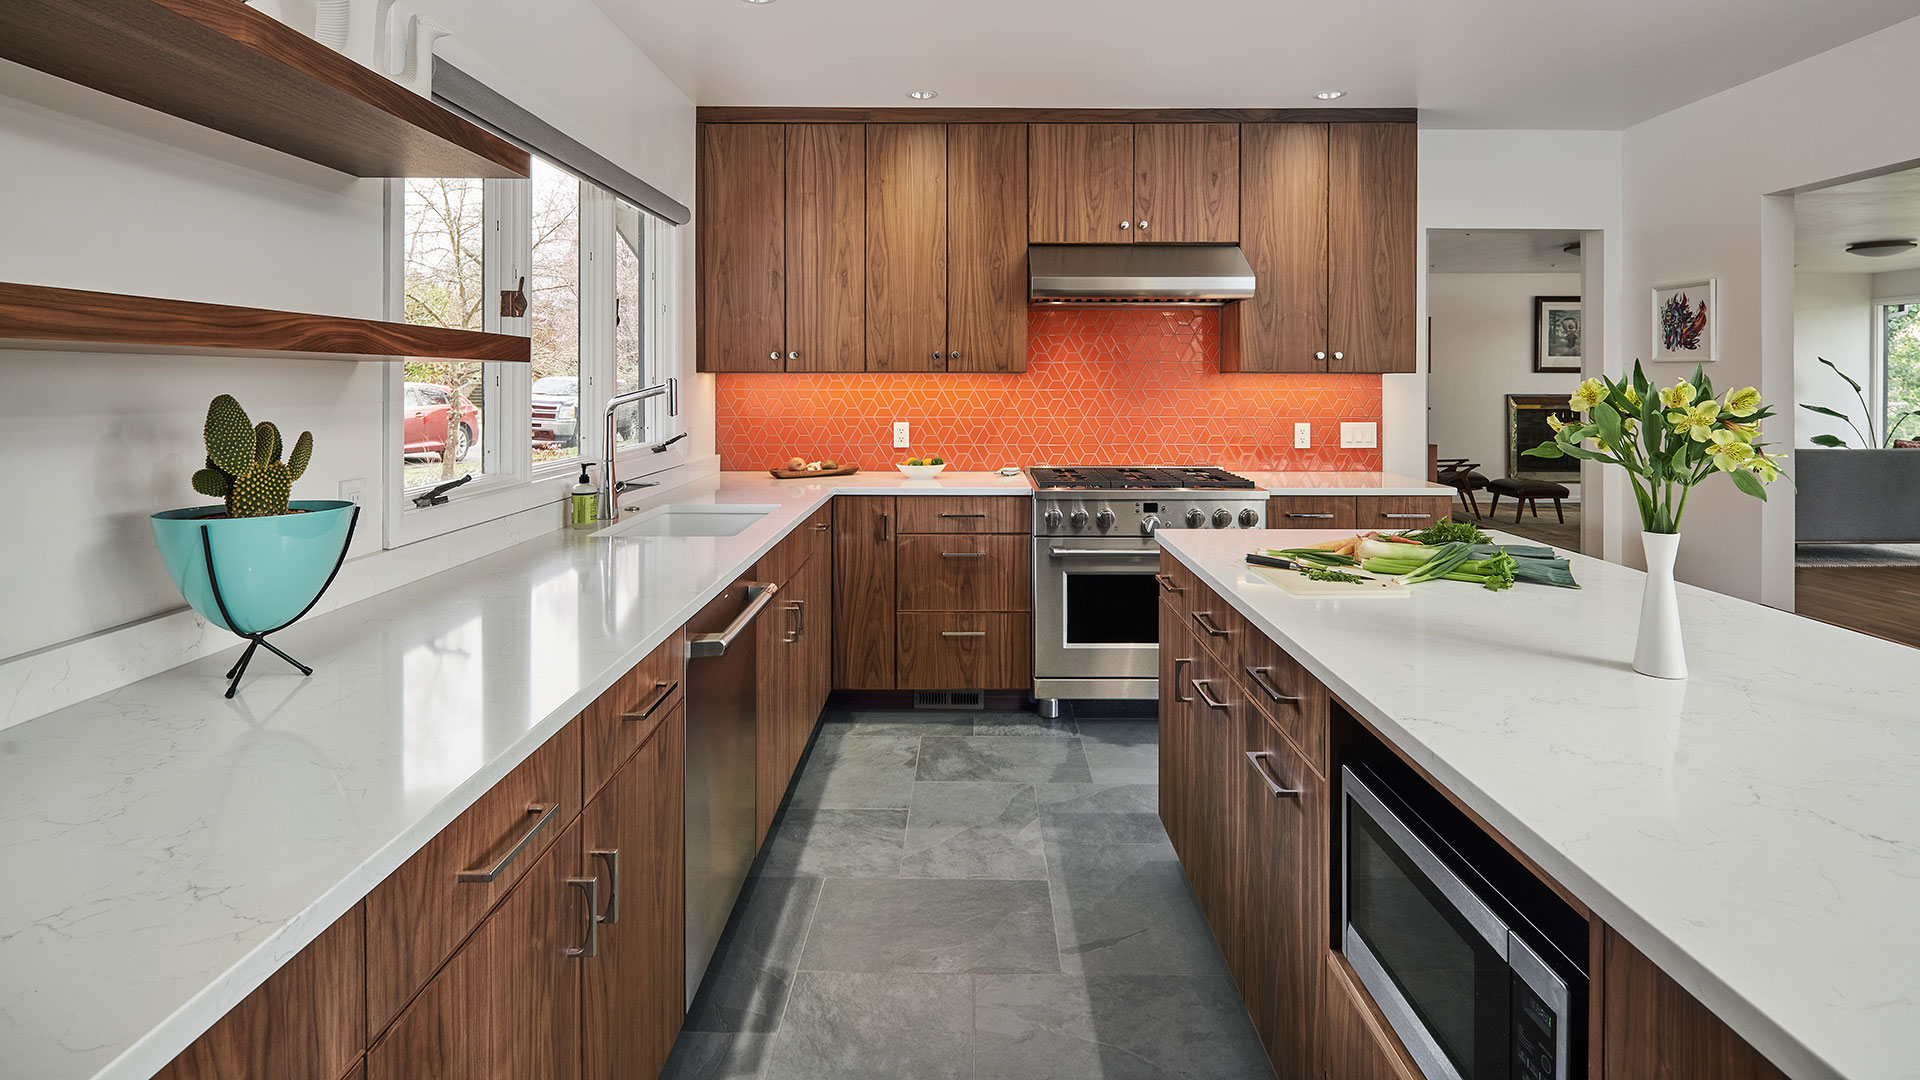 The renovated kitchen at the Eastmoreland Remodel features a large island.